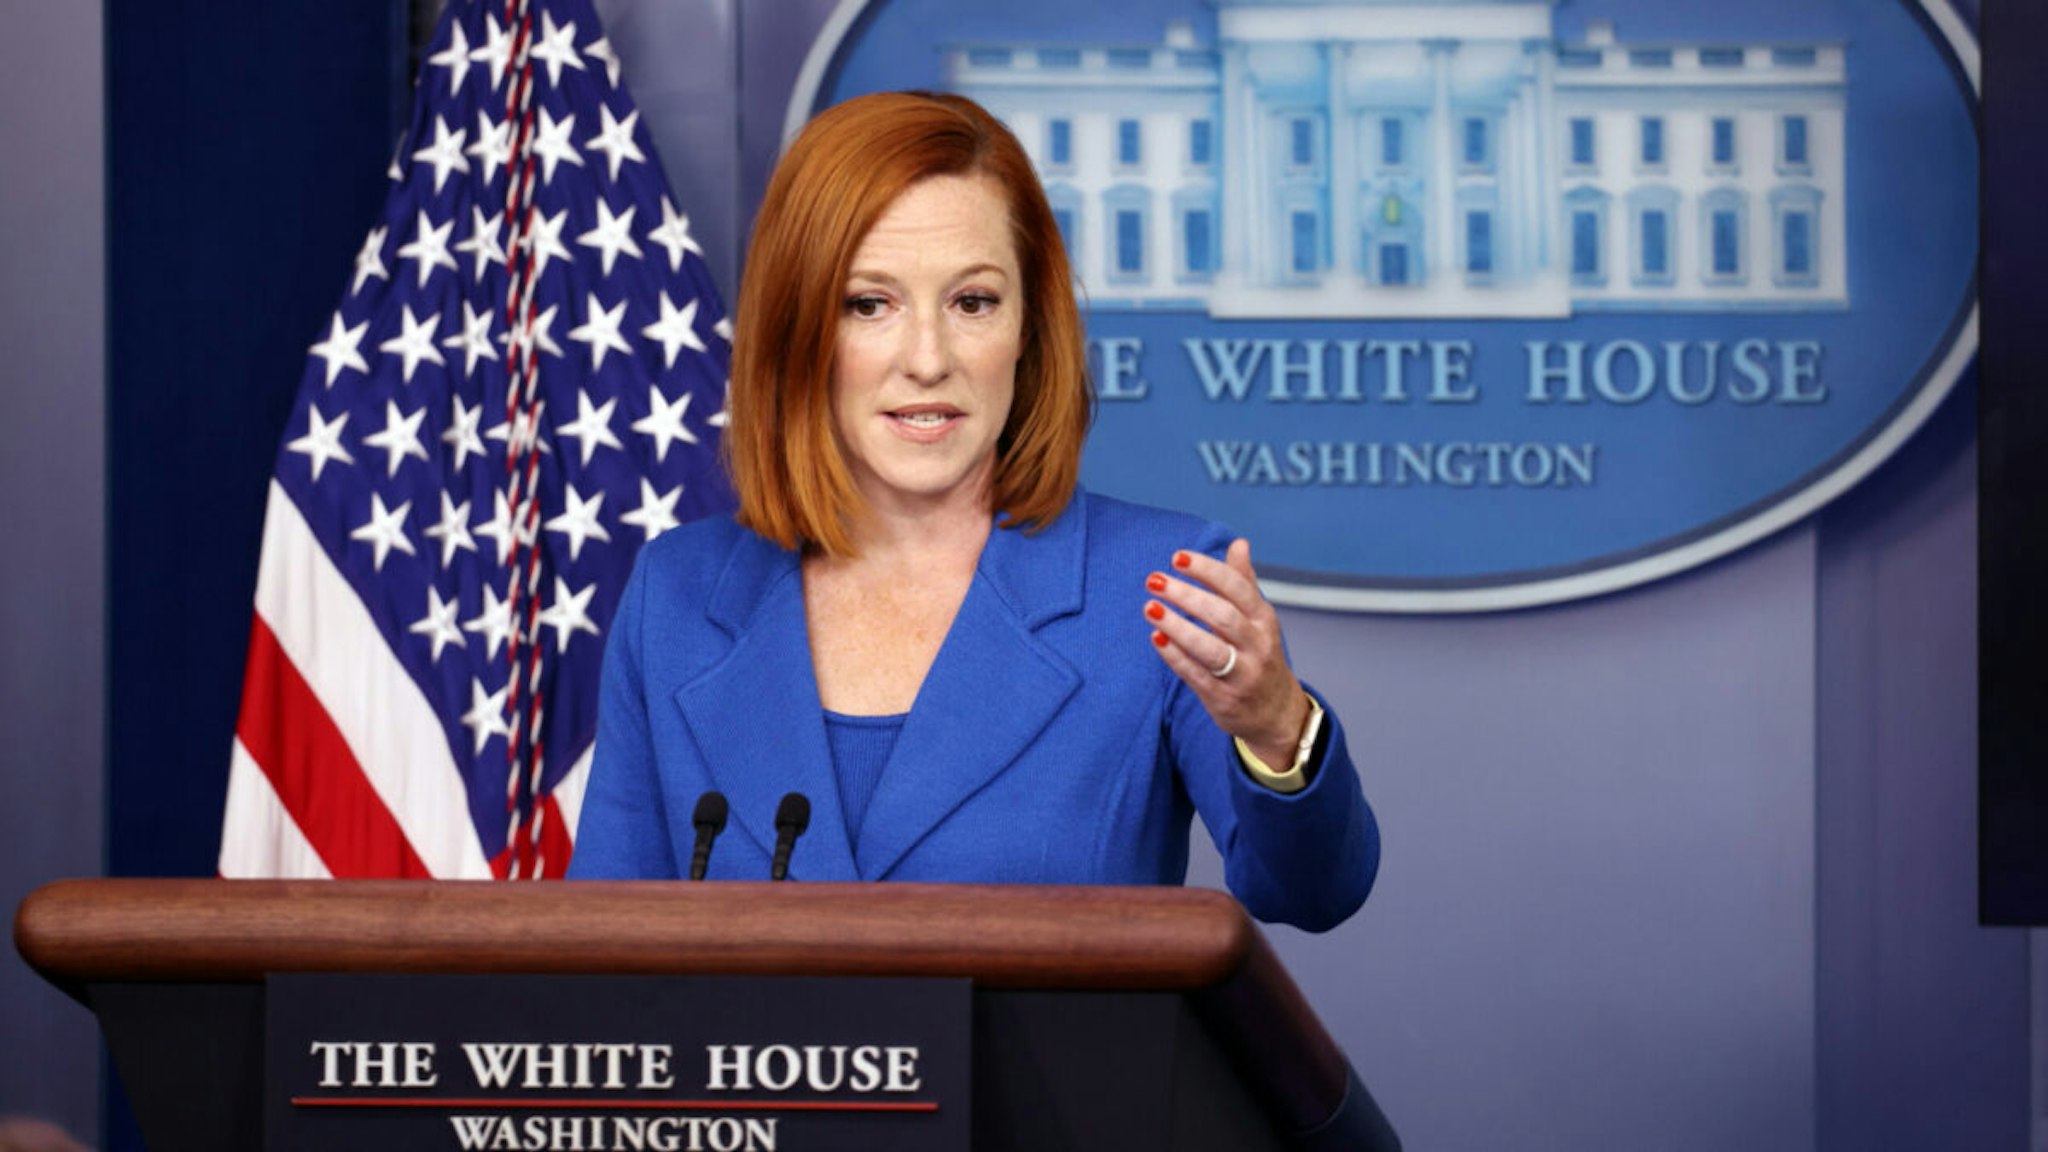 White House Press Secretary Jen Psaki speaks at a press briefing in the James Brady Press Briefing Room of the White House on August 02, 2021 in Washington, DC.